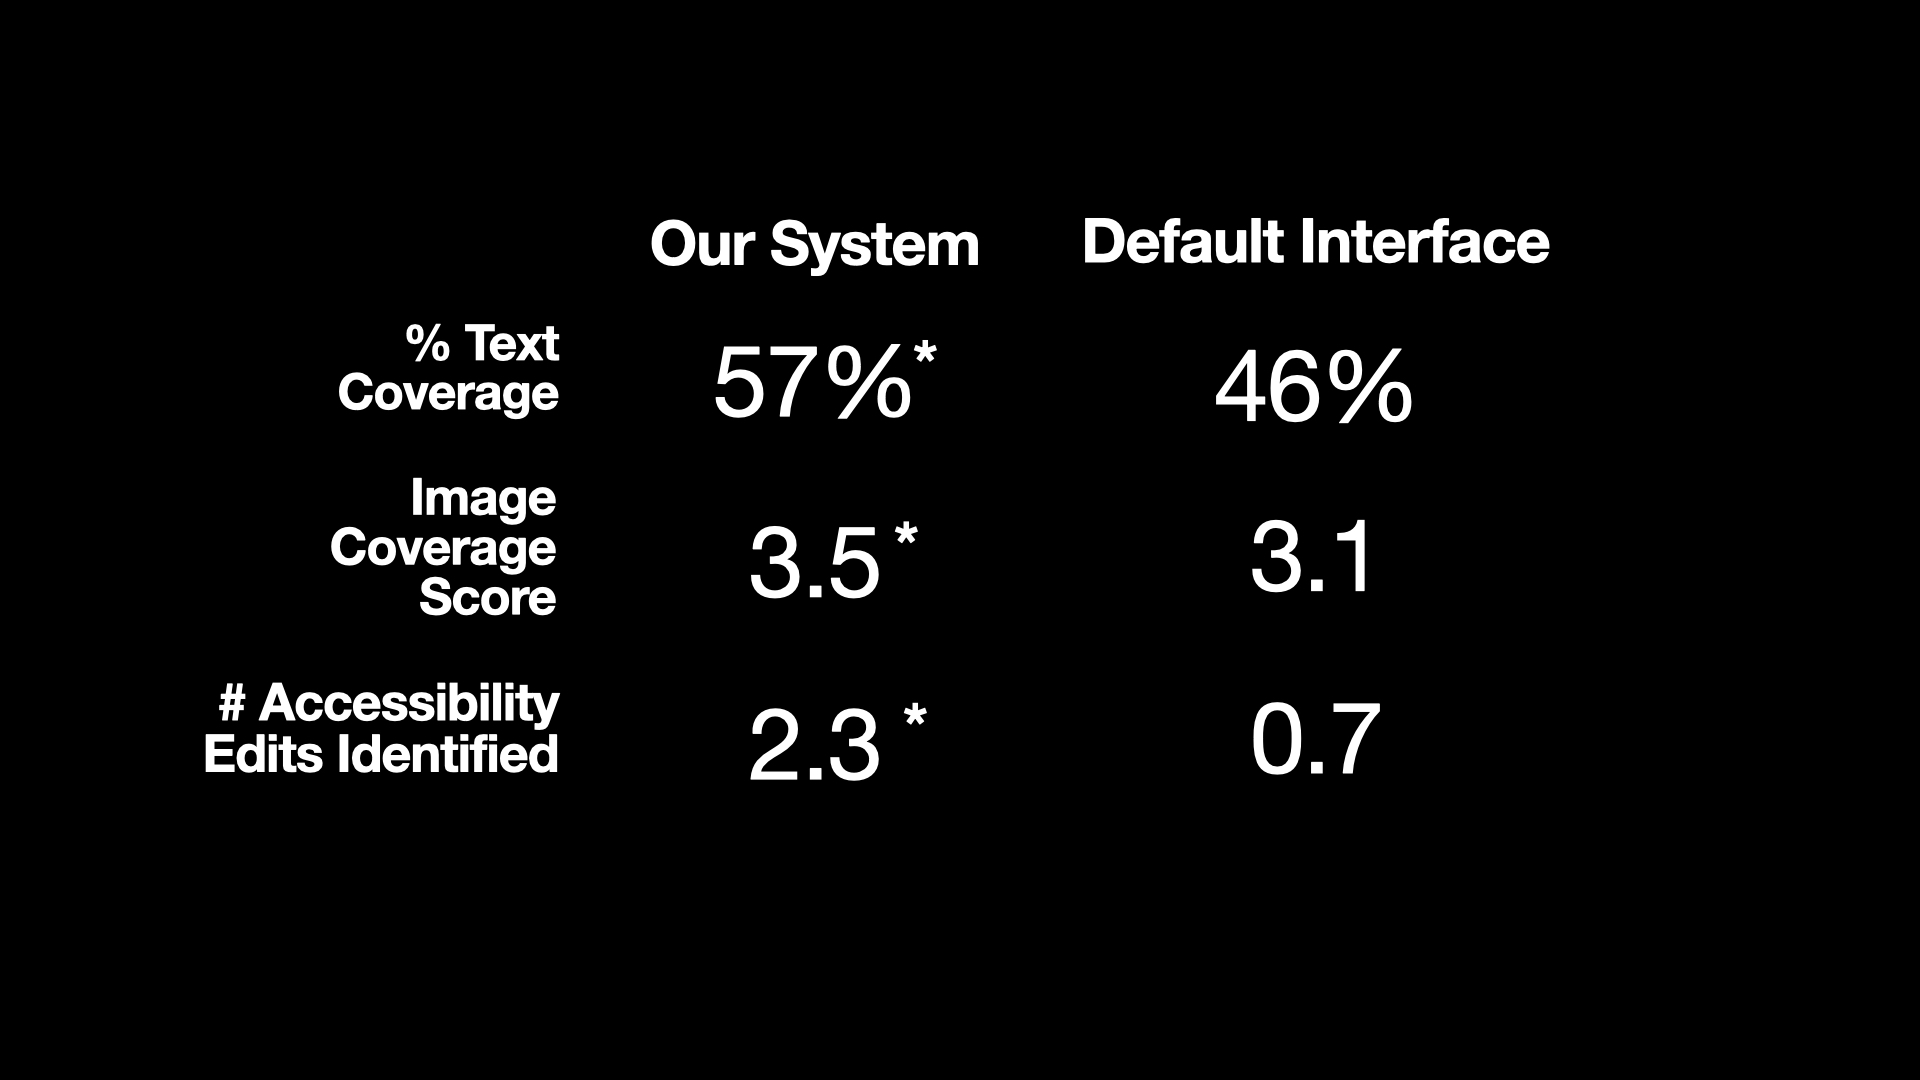 This slide shows the study results as a table. The first column contains three different metrics we evaluated. The first row is two comparison subjects, our system and default interface. The second row is the text coverage %, where our system is 57% and the default interface is 46%. The third row is the image coverage score, where our system is 3.5 and the default interface is 3.1. The last row is the number of accessibility edits identified, where our system is 2.3 and the default interface is 0.7. Our system significantly outperformed all the metrics compared to the default interface.